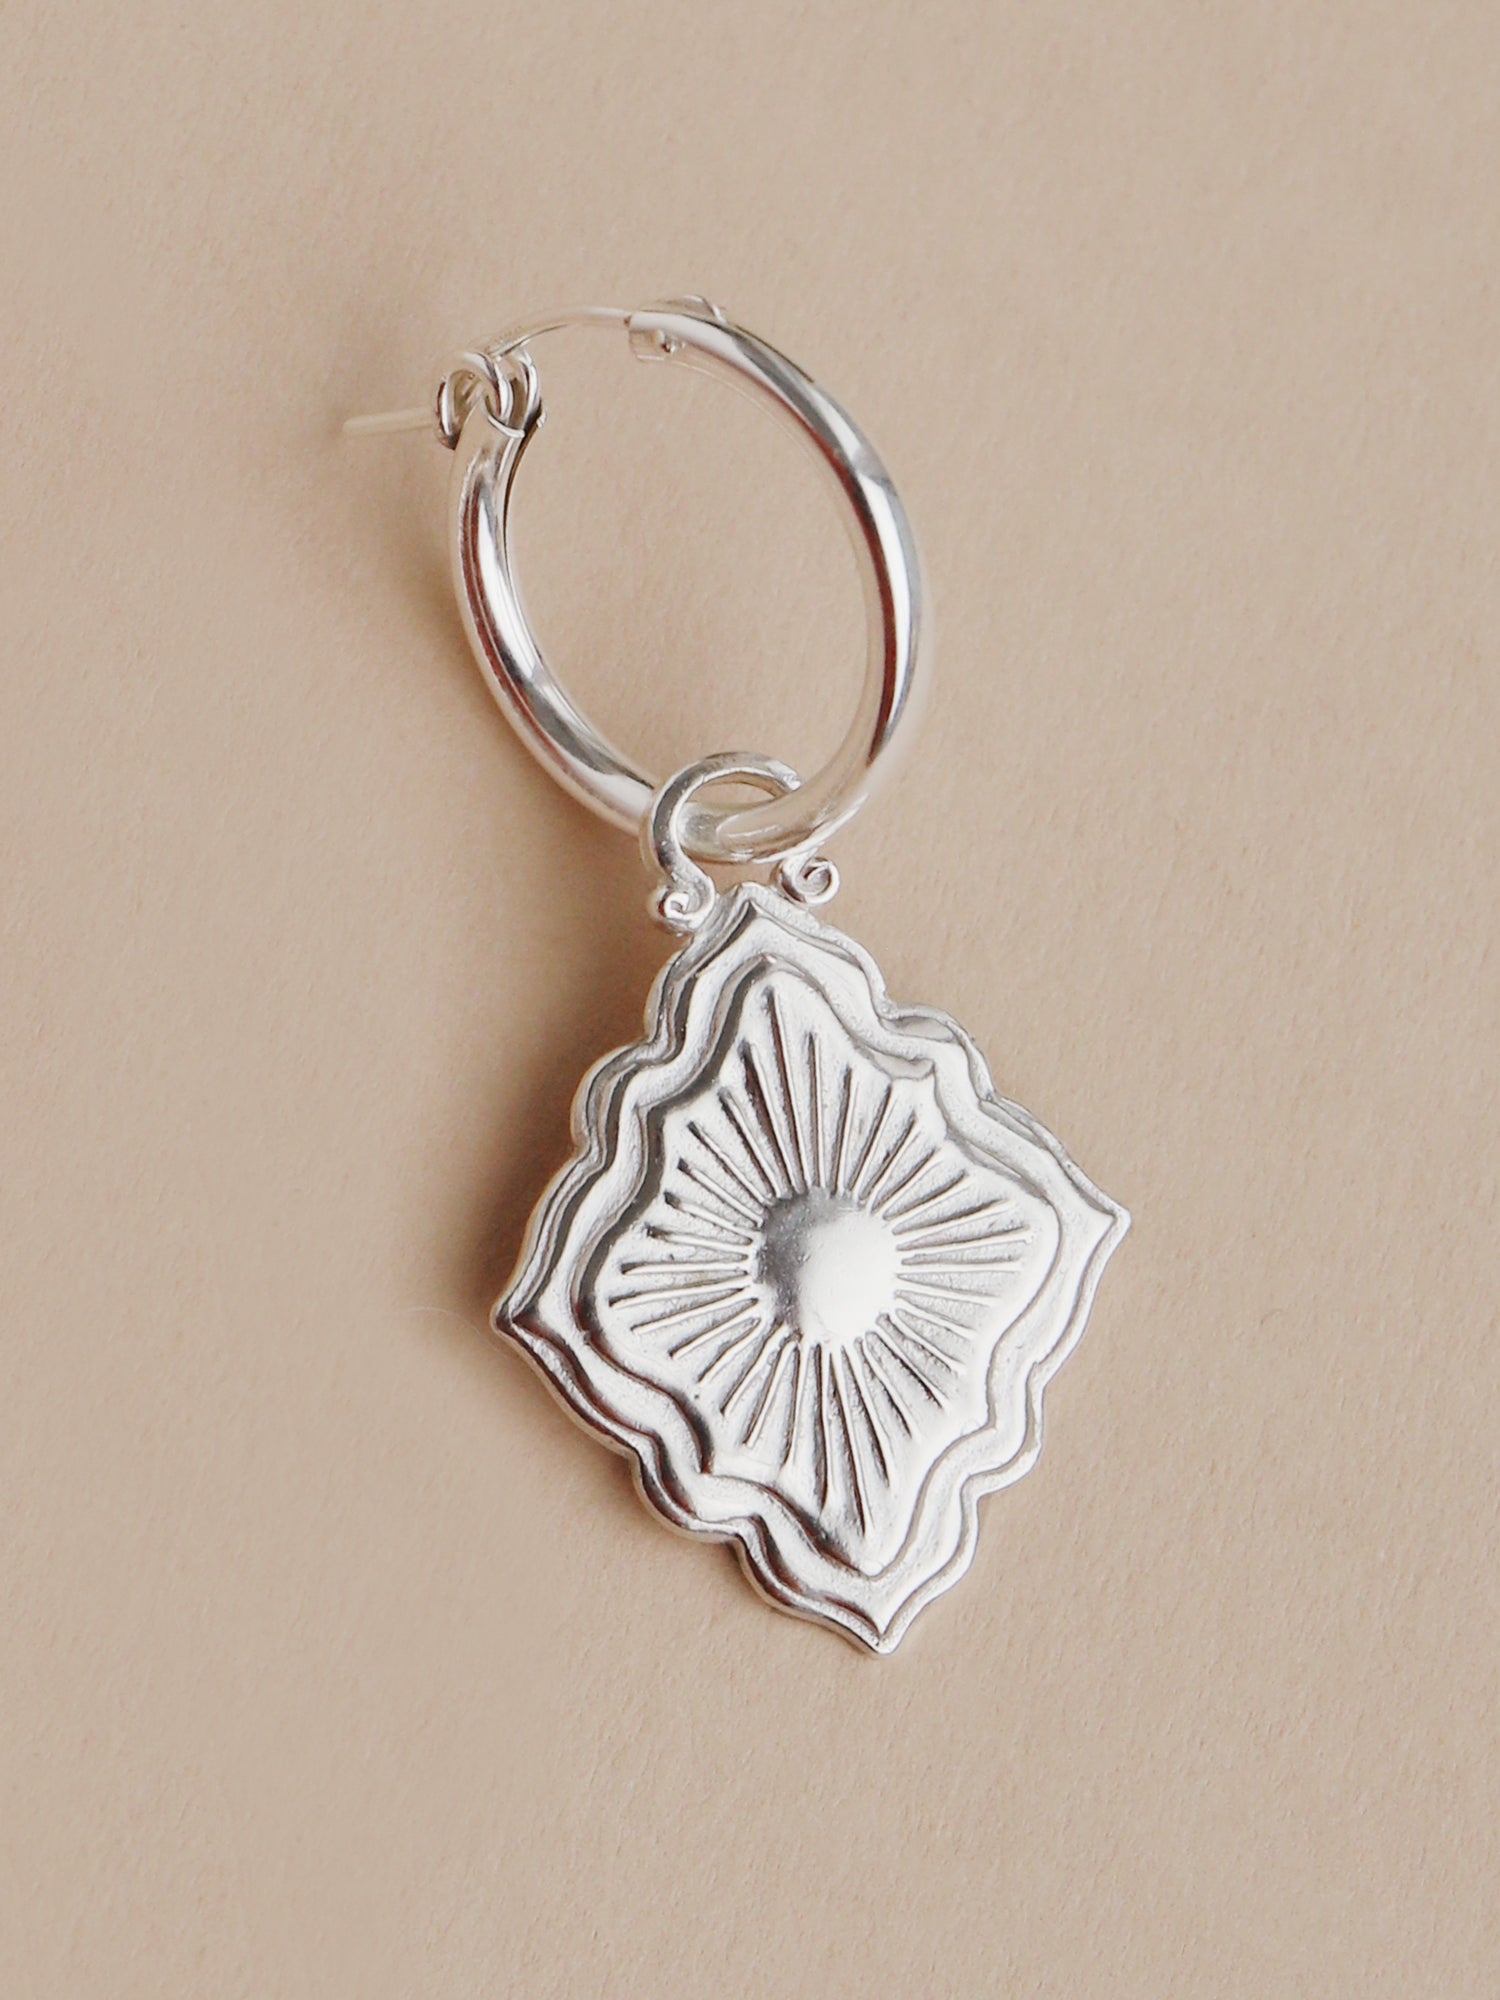 Leo - Individual Charm in Silver